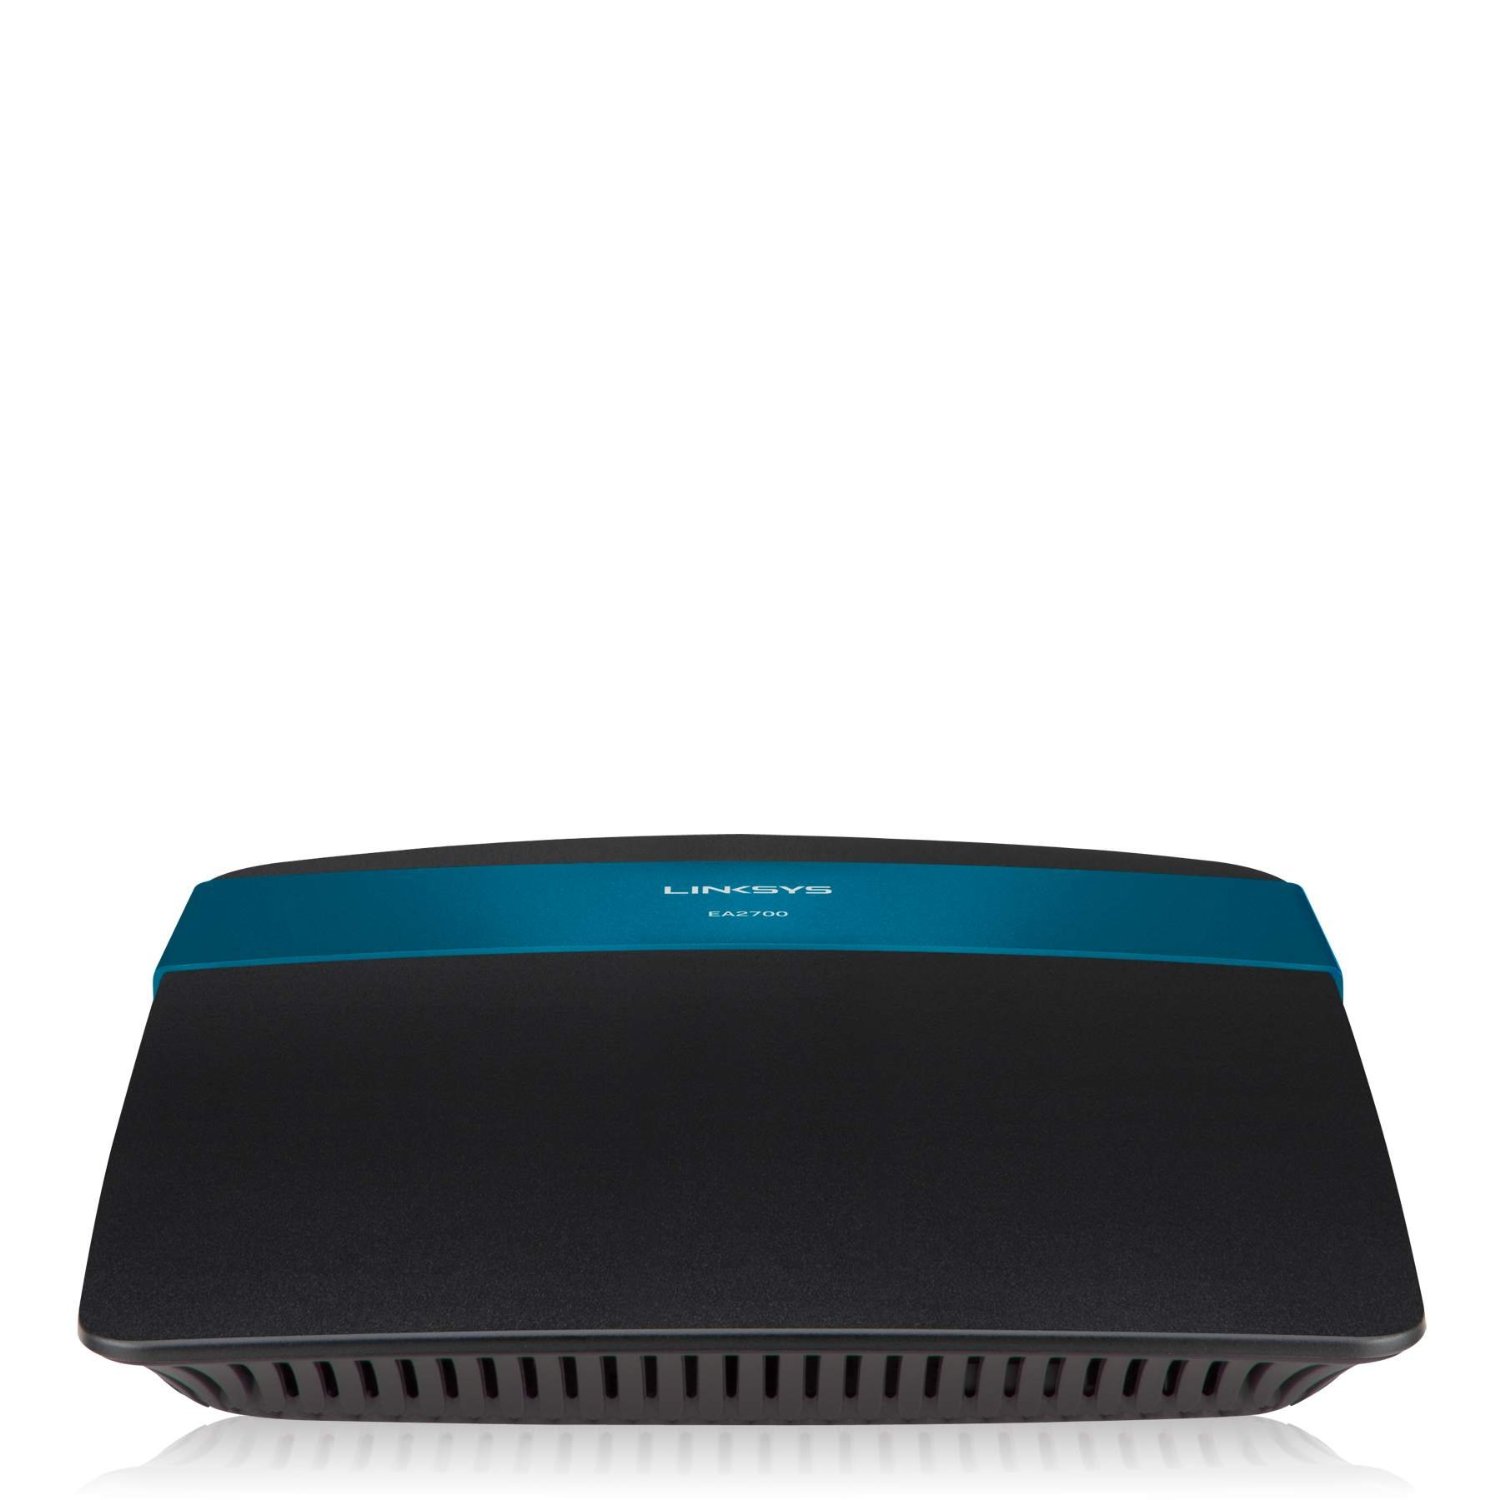 Linksys EA2700 Dual-Band Wireless-N600 - VIP Outlet